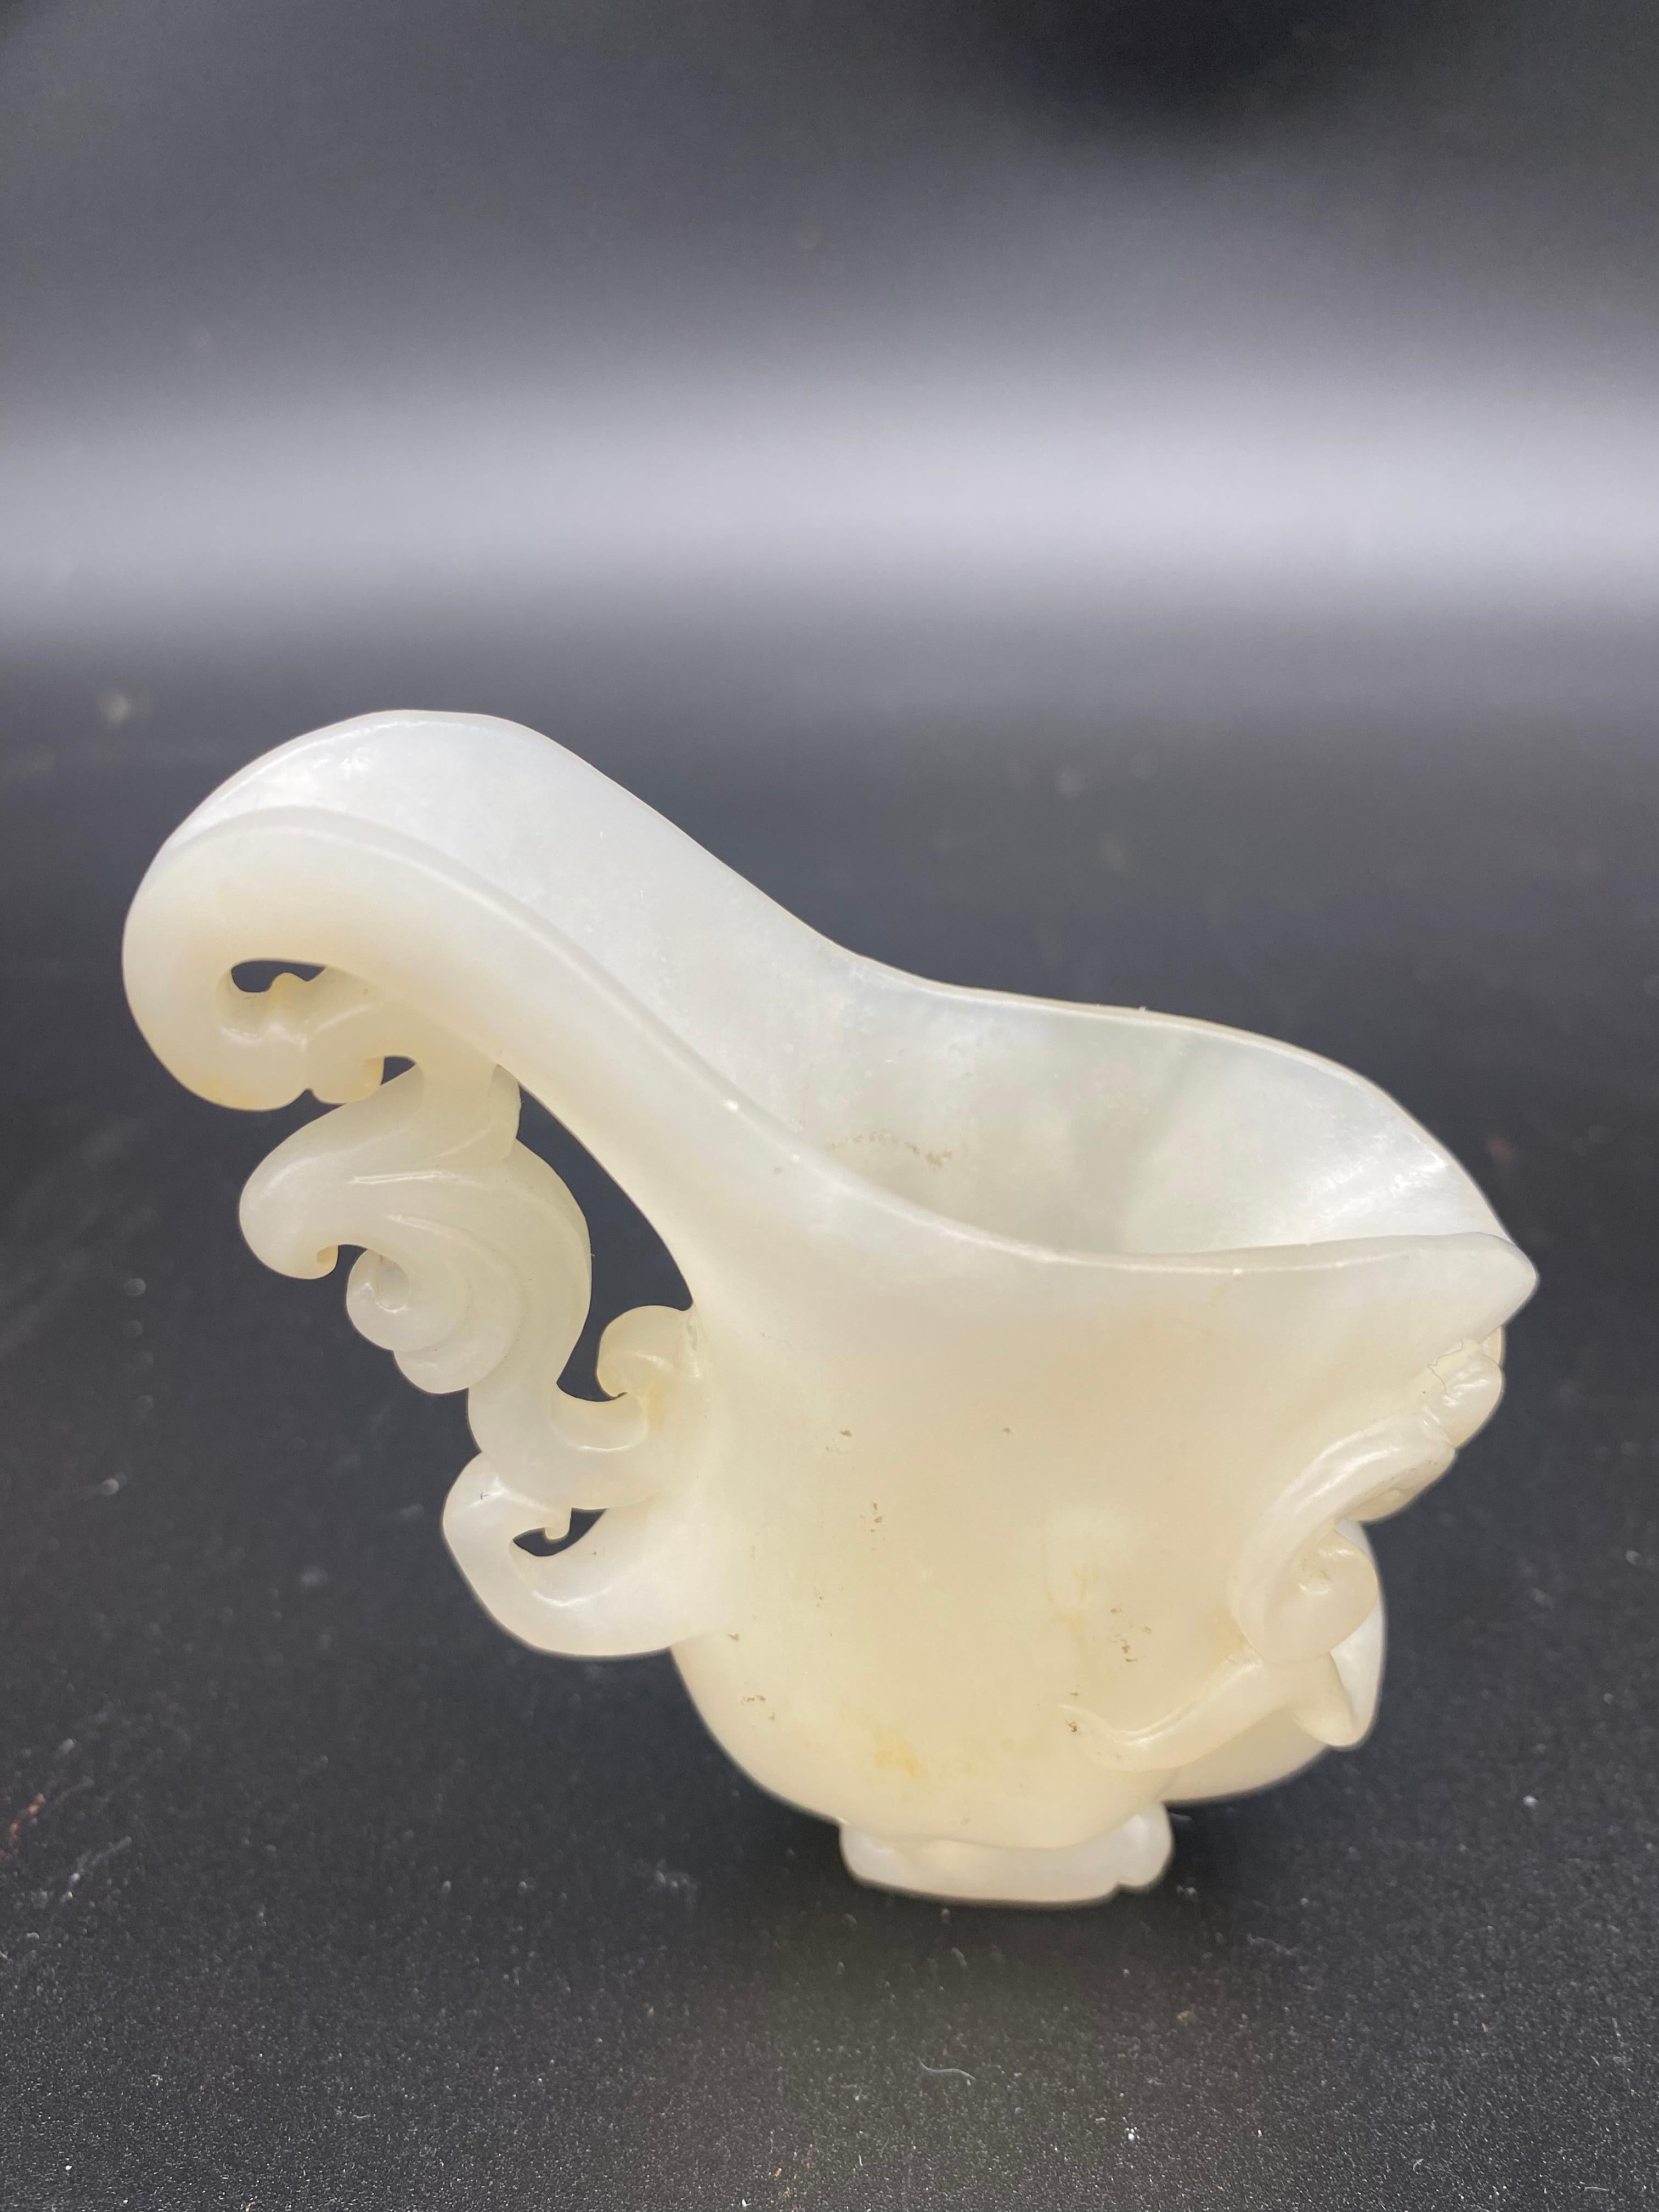 Antique 19th century Chinese small jade libation cup carving with Chi dragon, decorated in the form of a flower
Size: 3.5” x 3” x 1”.